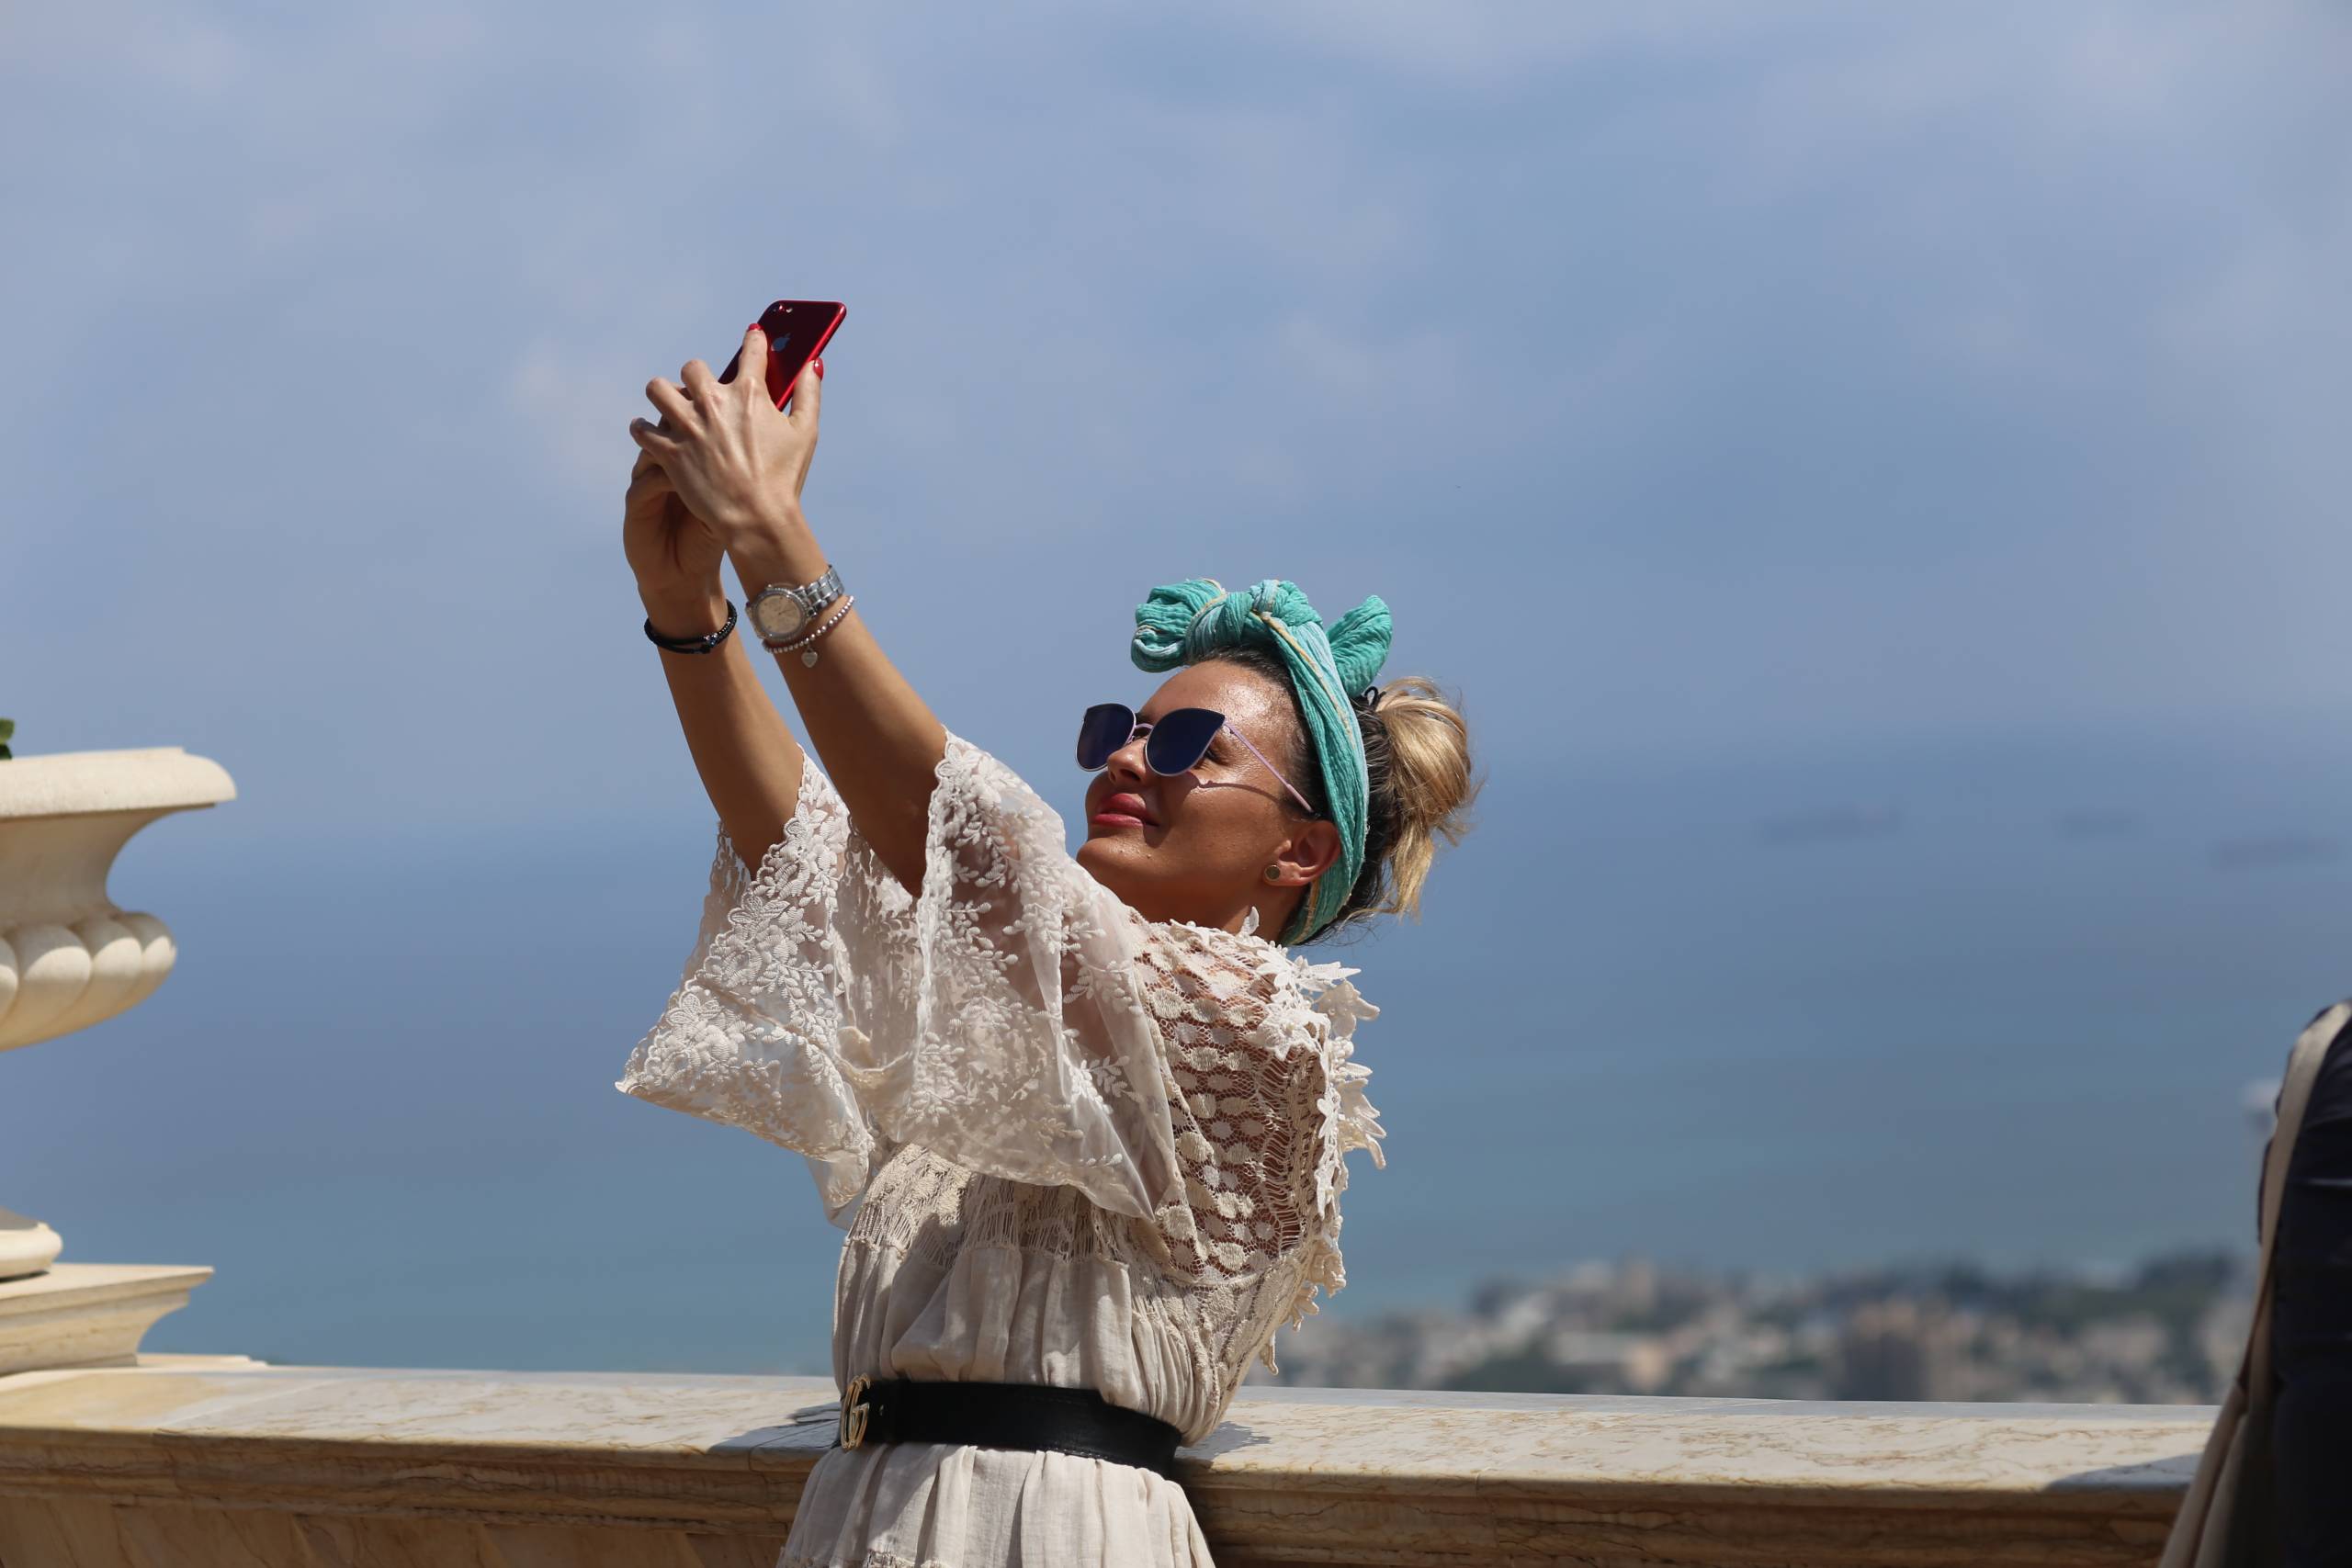 Why are vacation selfies are great for travel marketing?